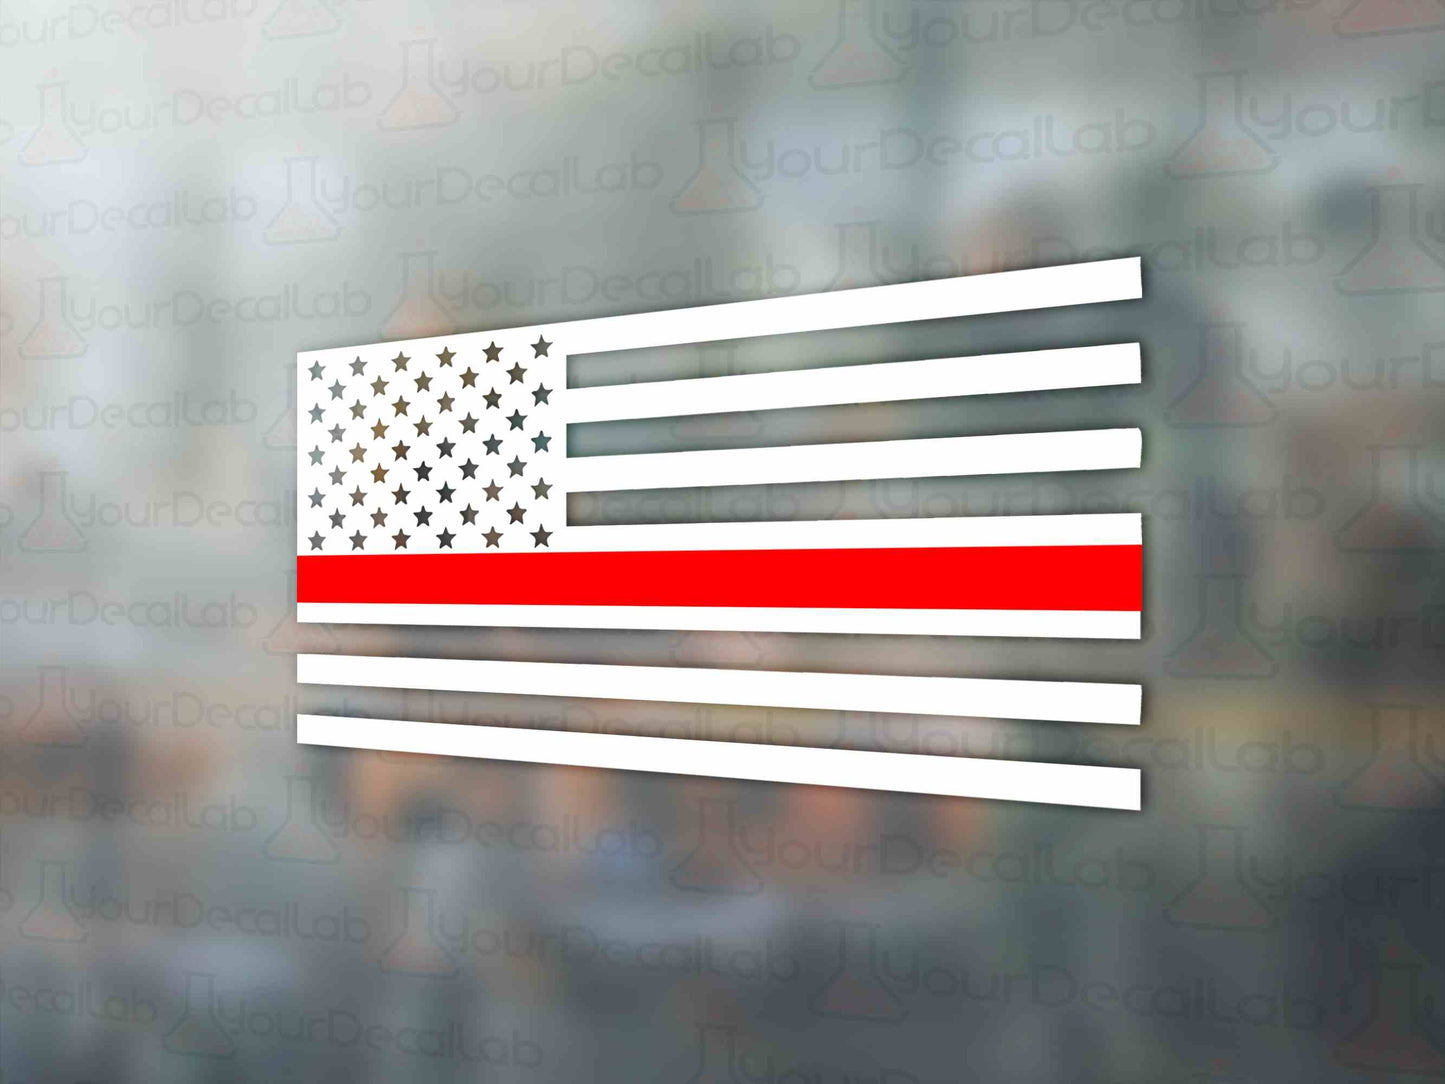 Red Line Decal American Flag - Many Colors & Sizes